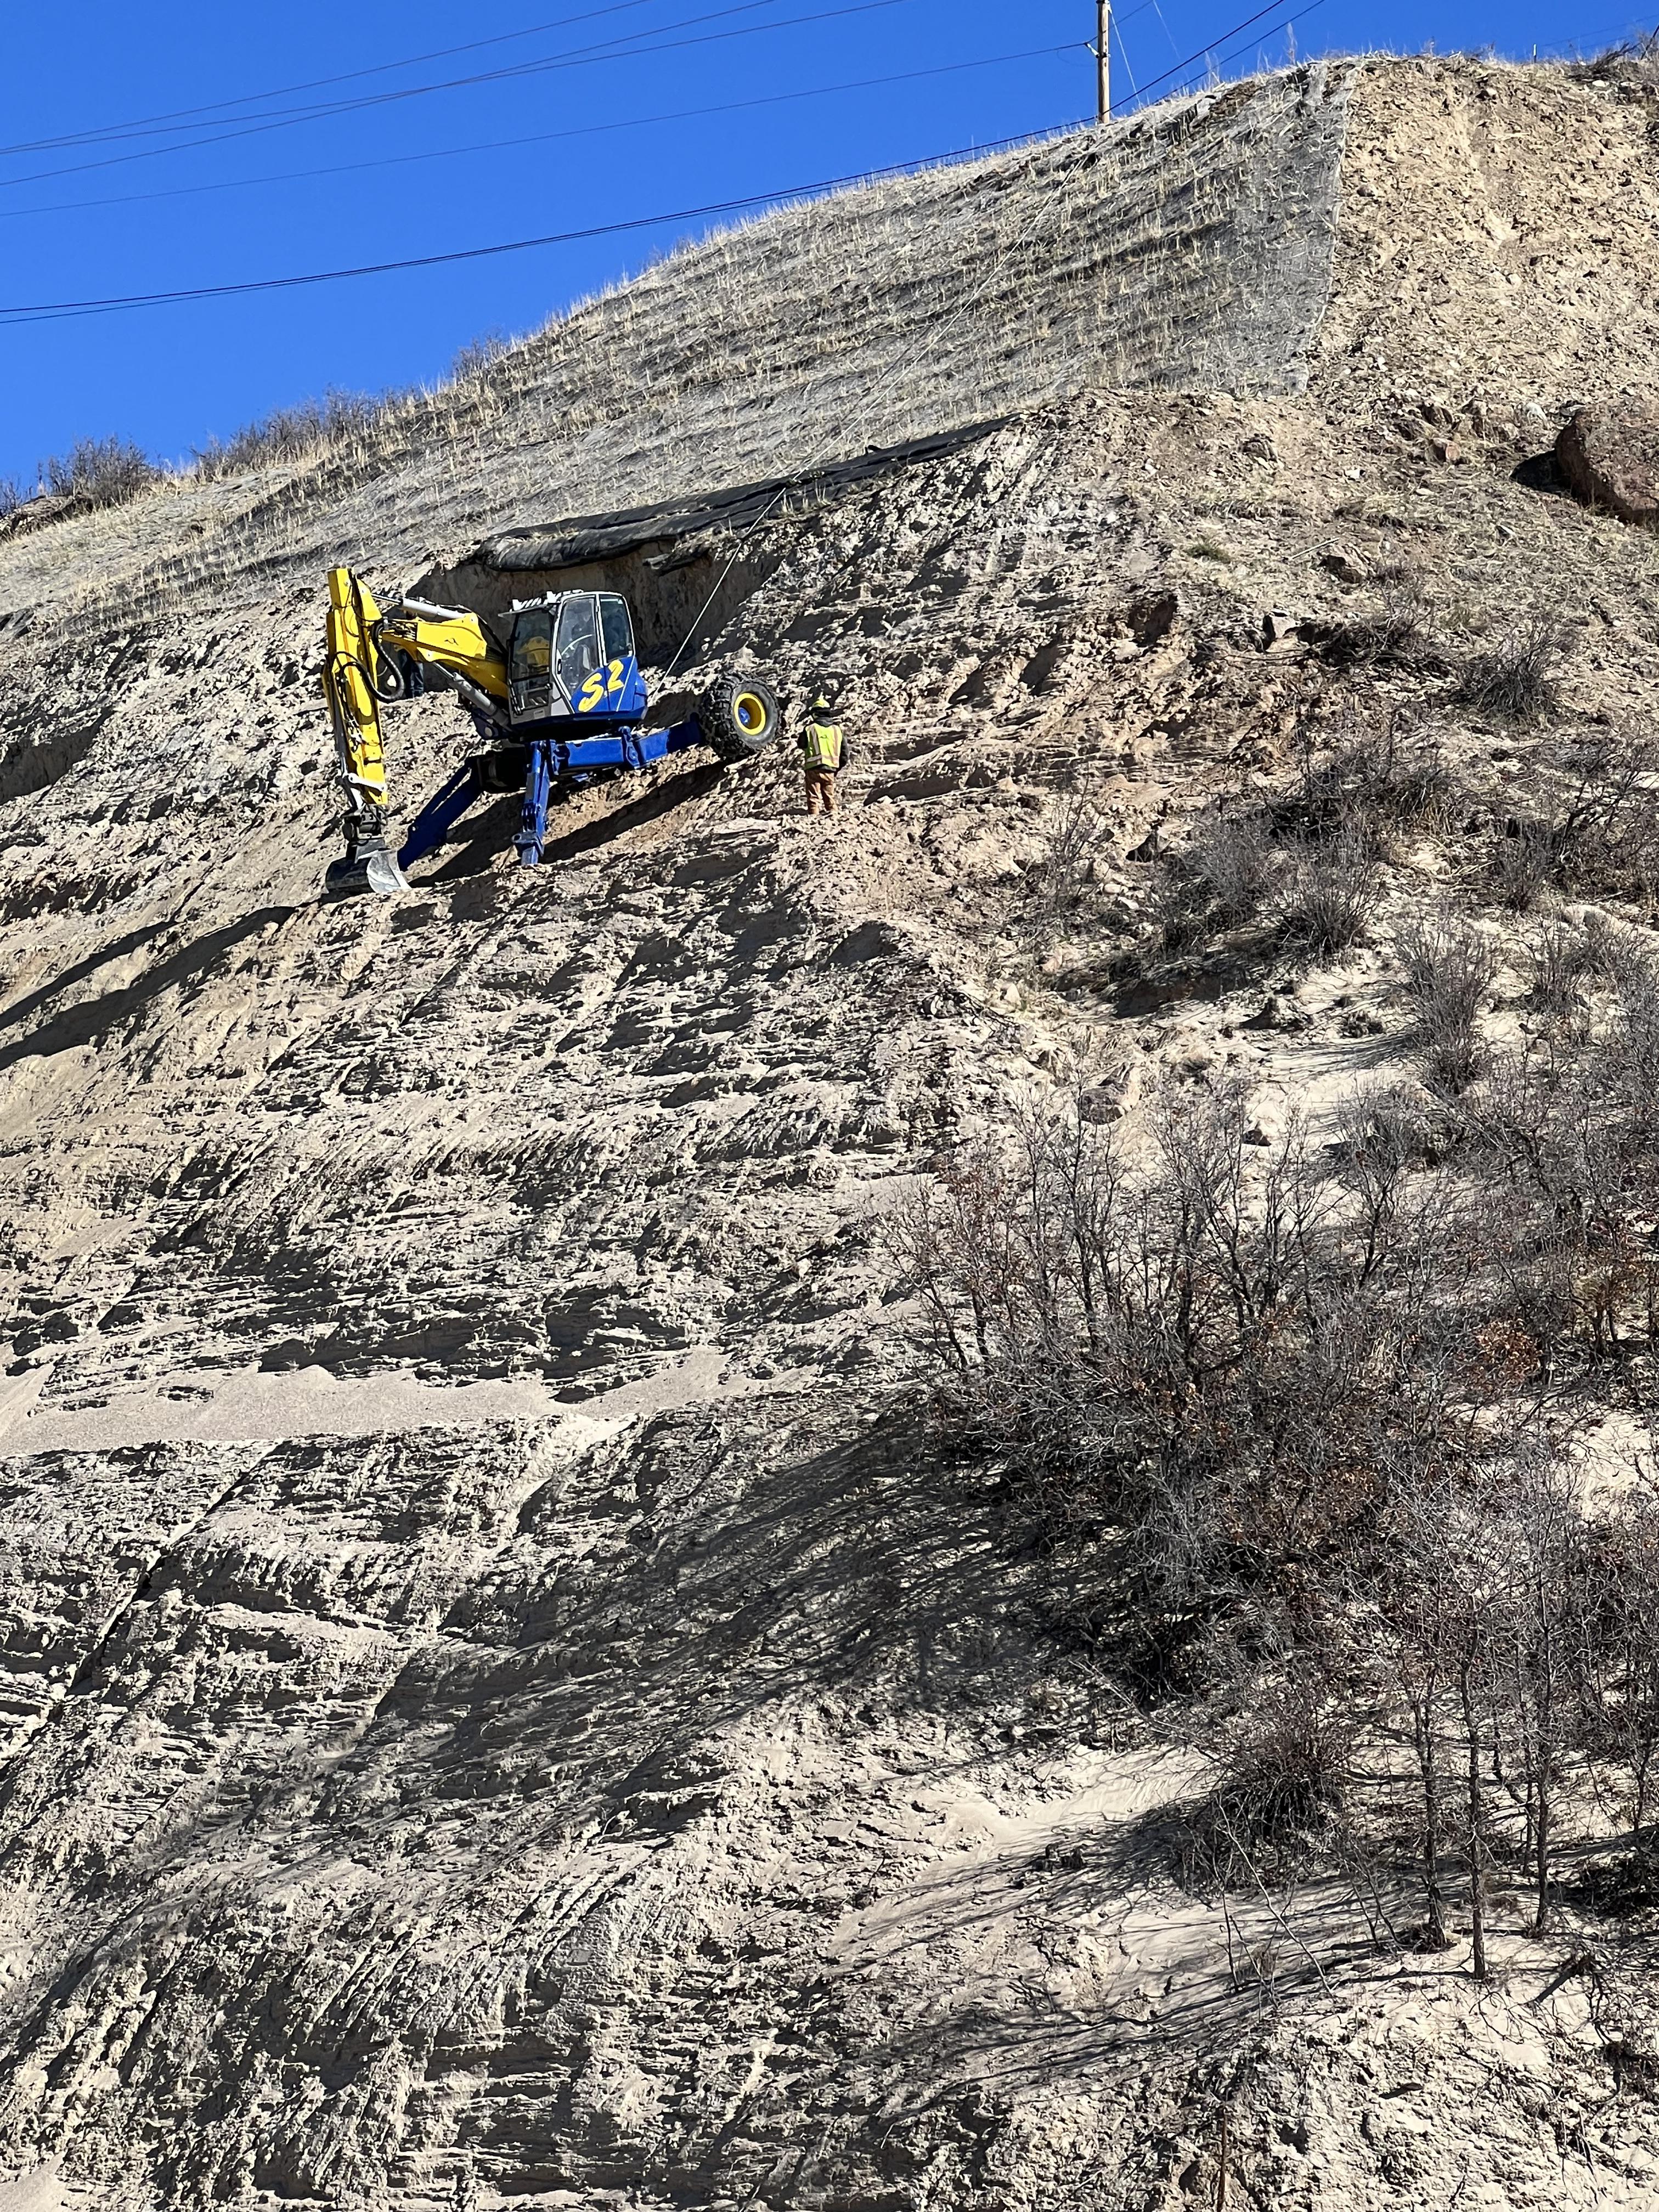 April 8, 2022. Using a spider excavator, loose rock and material is worked off the slope where it can be carried away. detail image